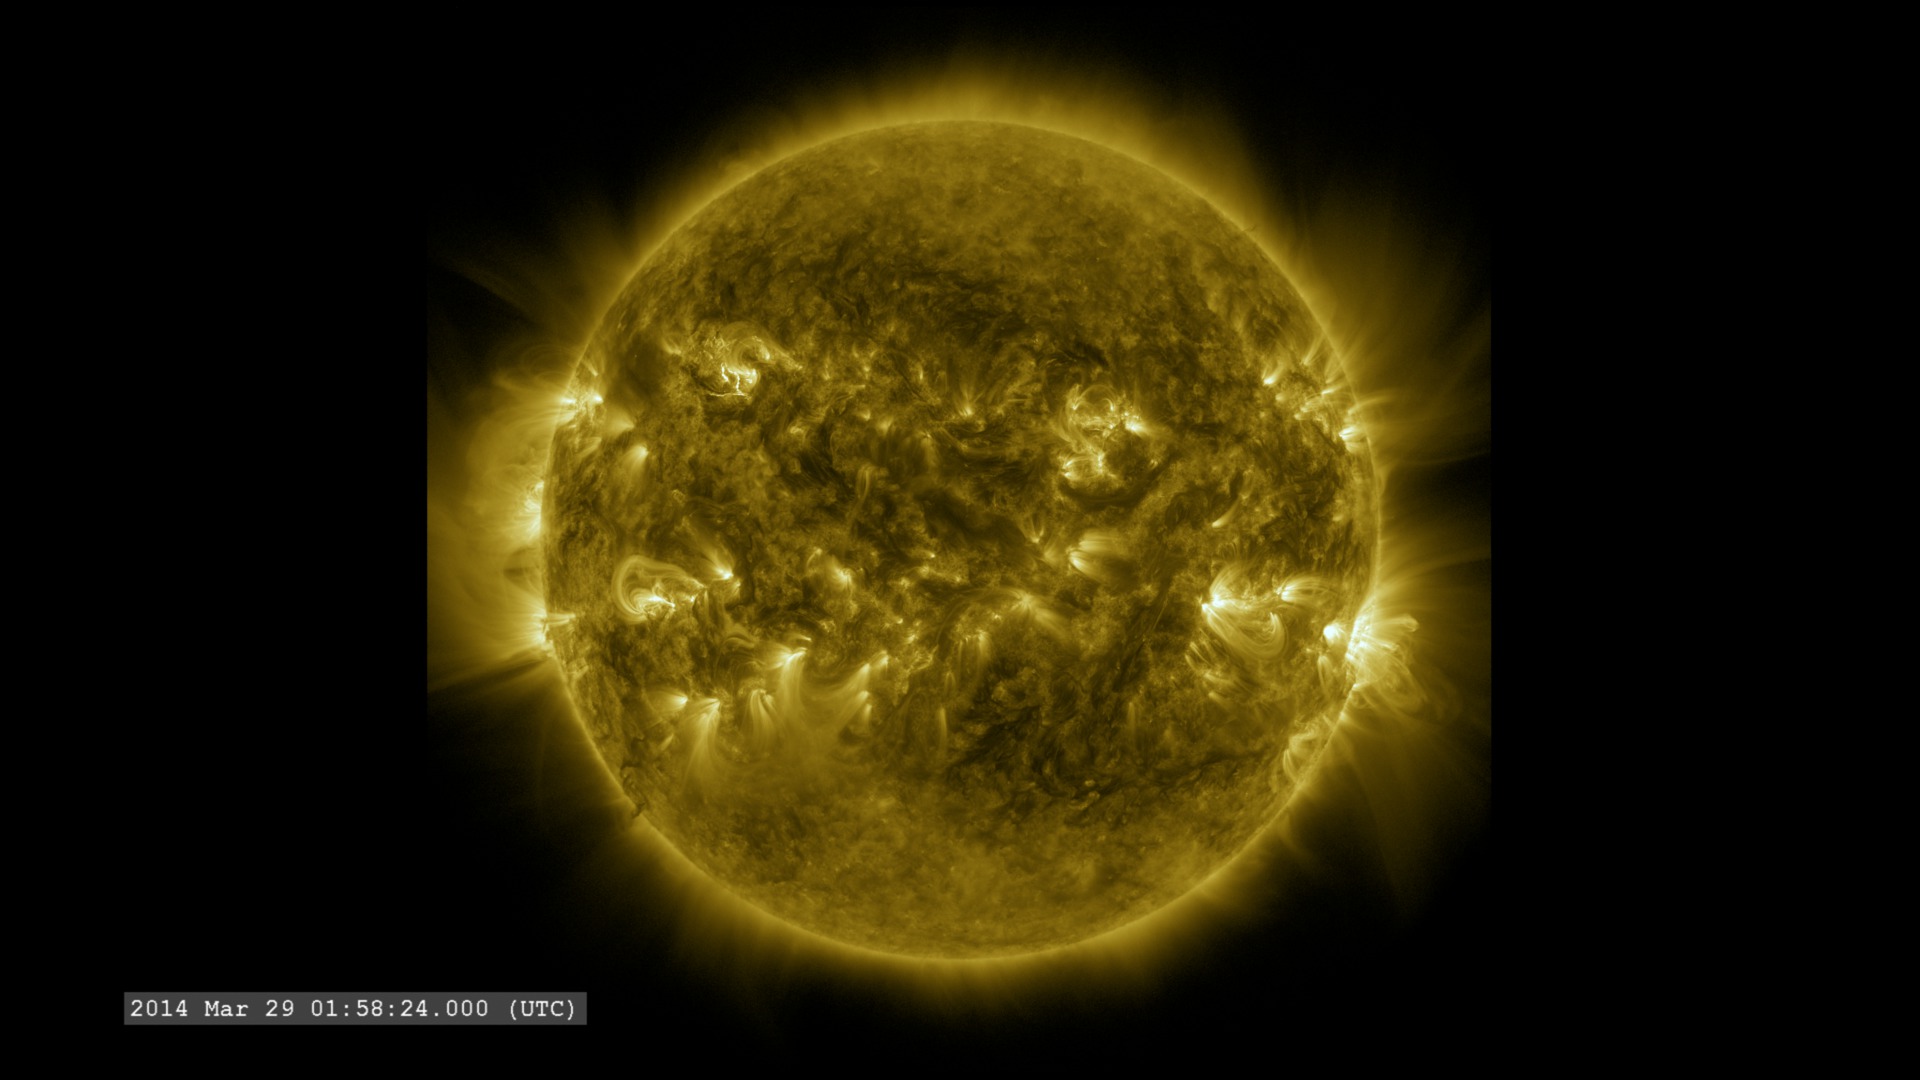 Prominence eruption in the SDO/AIA 17.1nm filter.